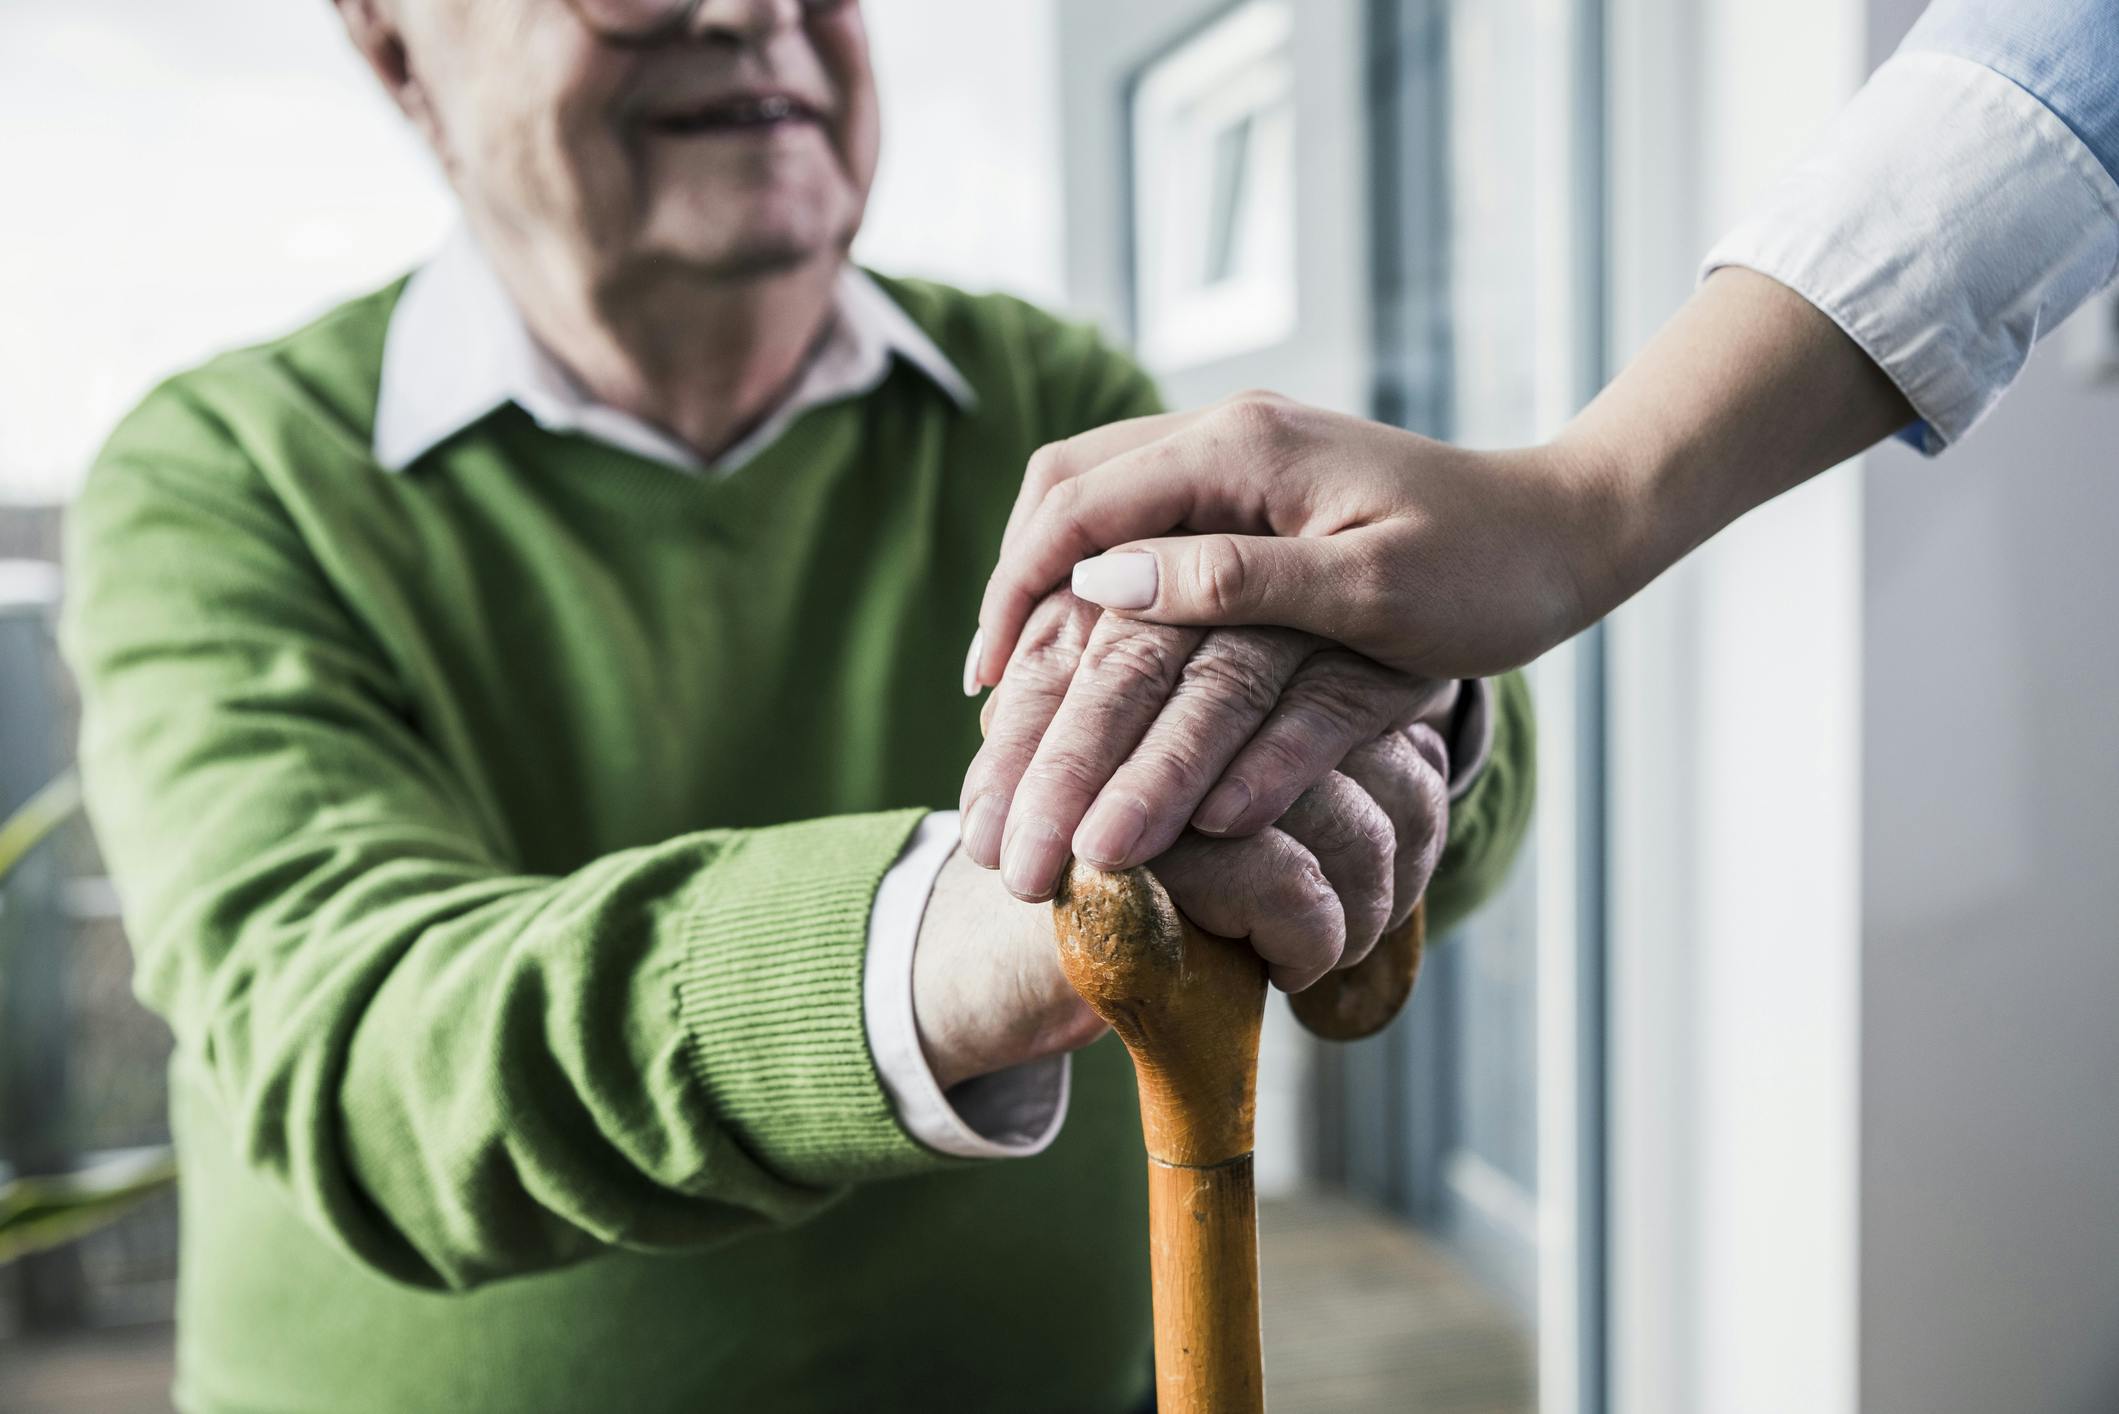 13 Things to Watch Out for When Caring for Someone with Limited Mobility